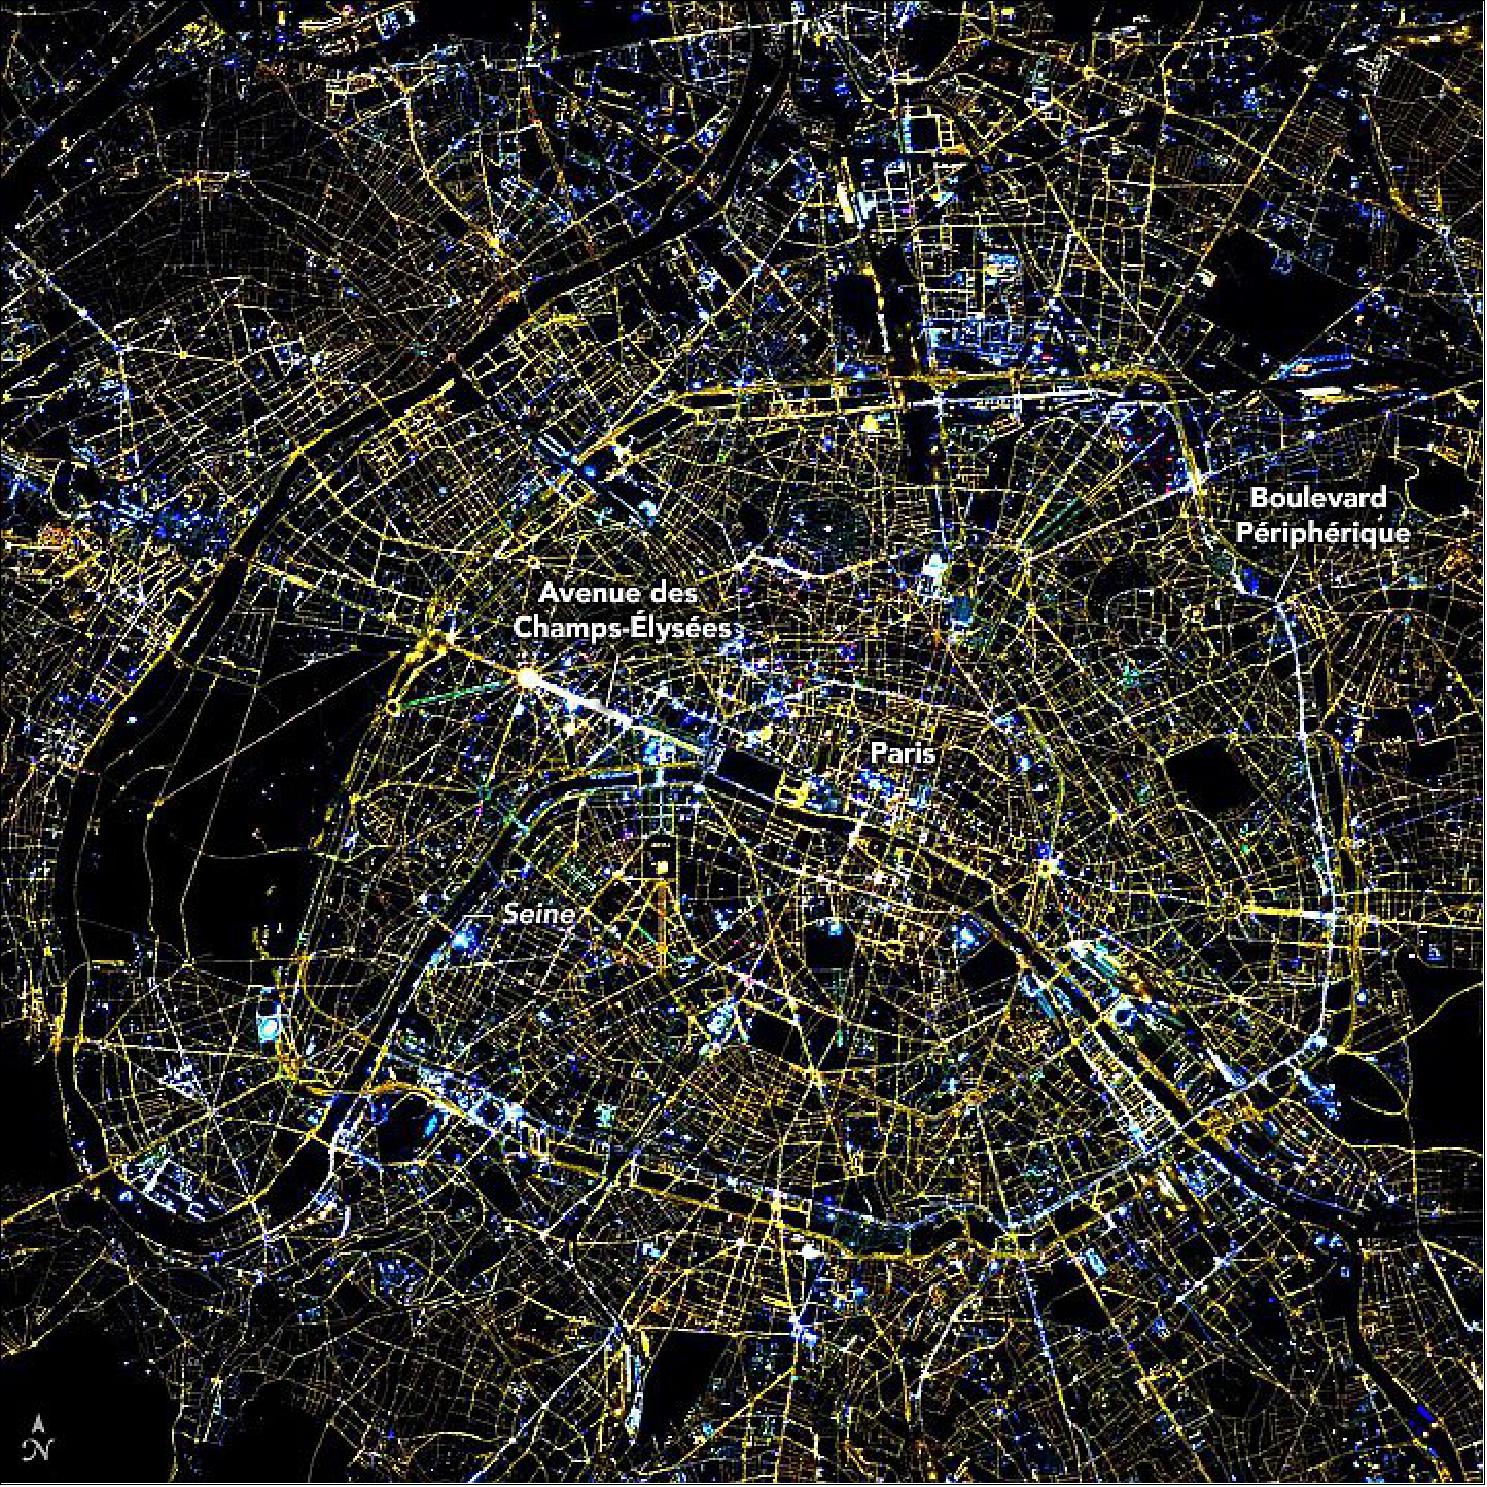 Figure 10: The ISS photographs of Paris (Figure 10) and Kuwait City (Figure 11) have been calibrated to a color temperature of 2200 Kelvin, typical of high-pressure sodium lights. These two cities display very different color and spatial configurations. Light in Paris comes almost entirely from streetlights—primarily yellow, but also blue and green. Avenue des Champs-Elysées appears white, likely because the brightness of the street lights and buildings saturated this part of the image. "Paris is probably the best example of the diversity of colors and spatial configurations that we are trying to quantify," Small said (image credit: NASA Earth Observatory)